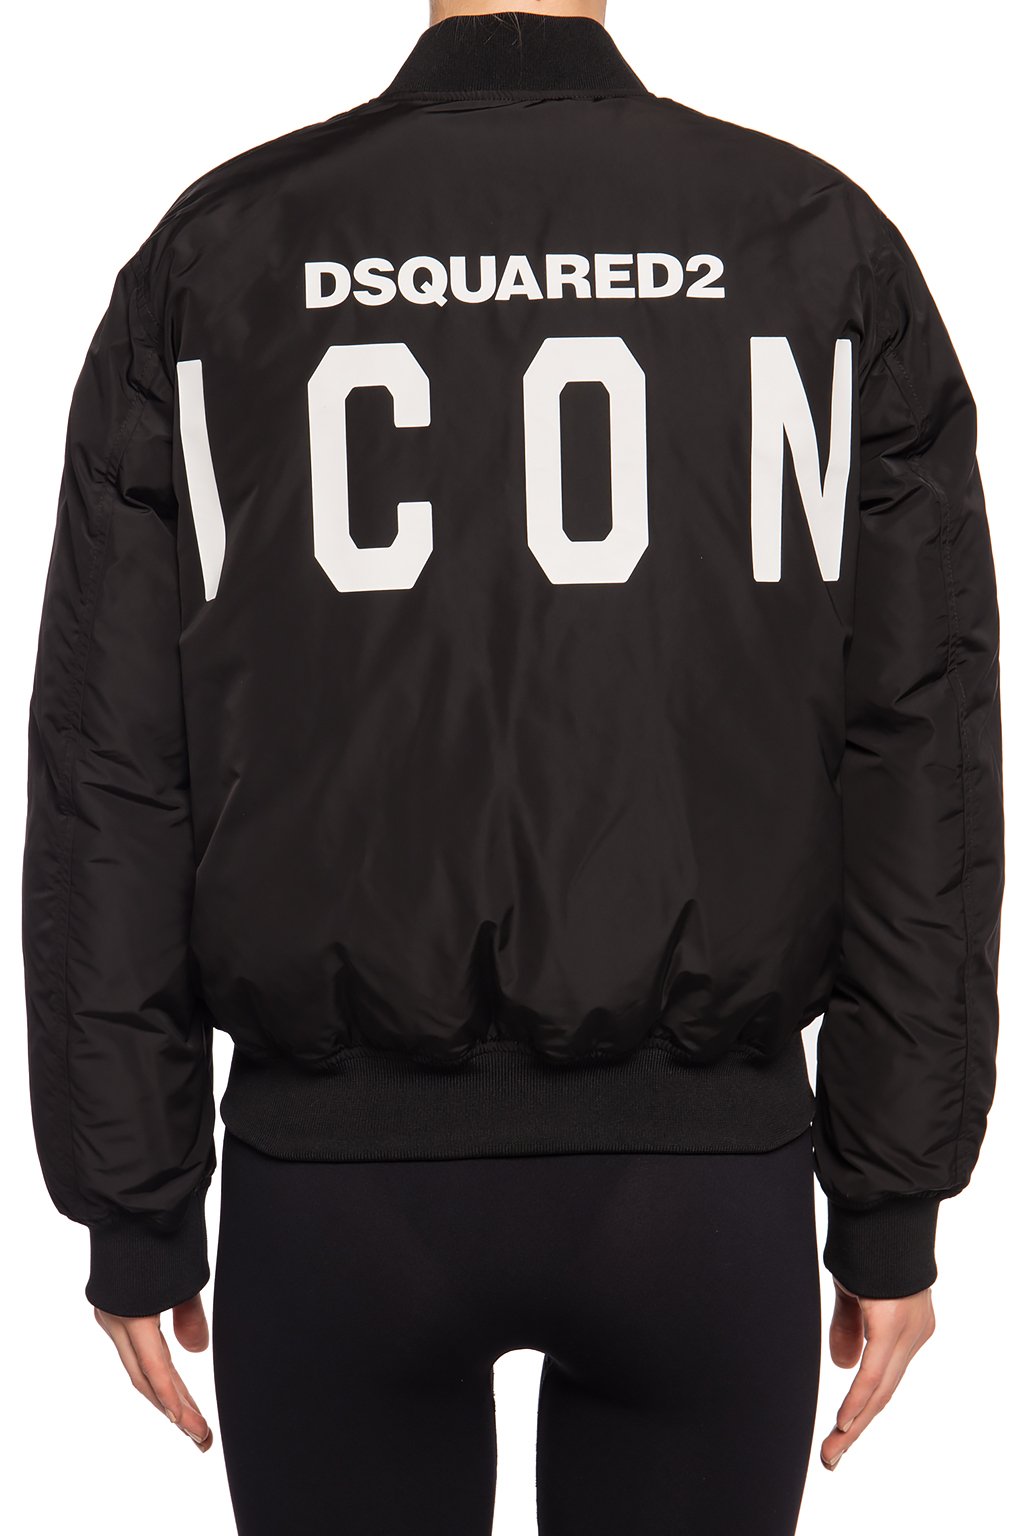 IetpShops | Dsquared2 Printed bomber jacket | Women's Clothing 